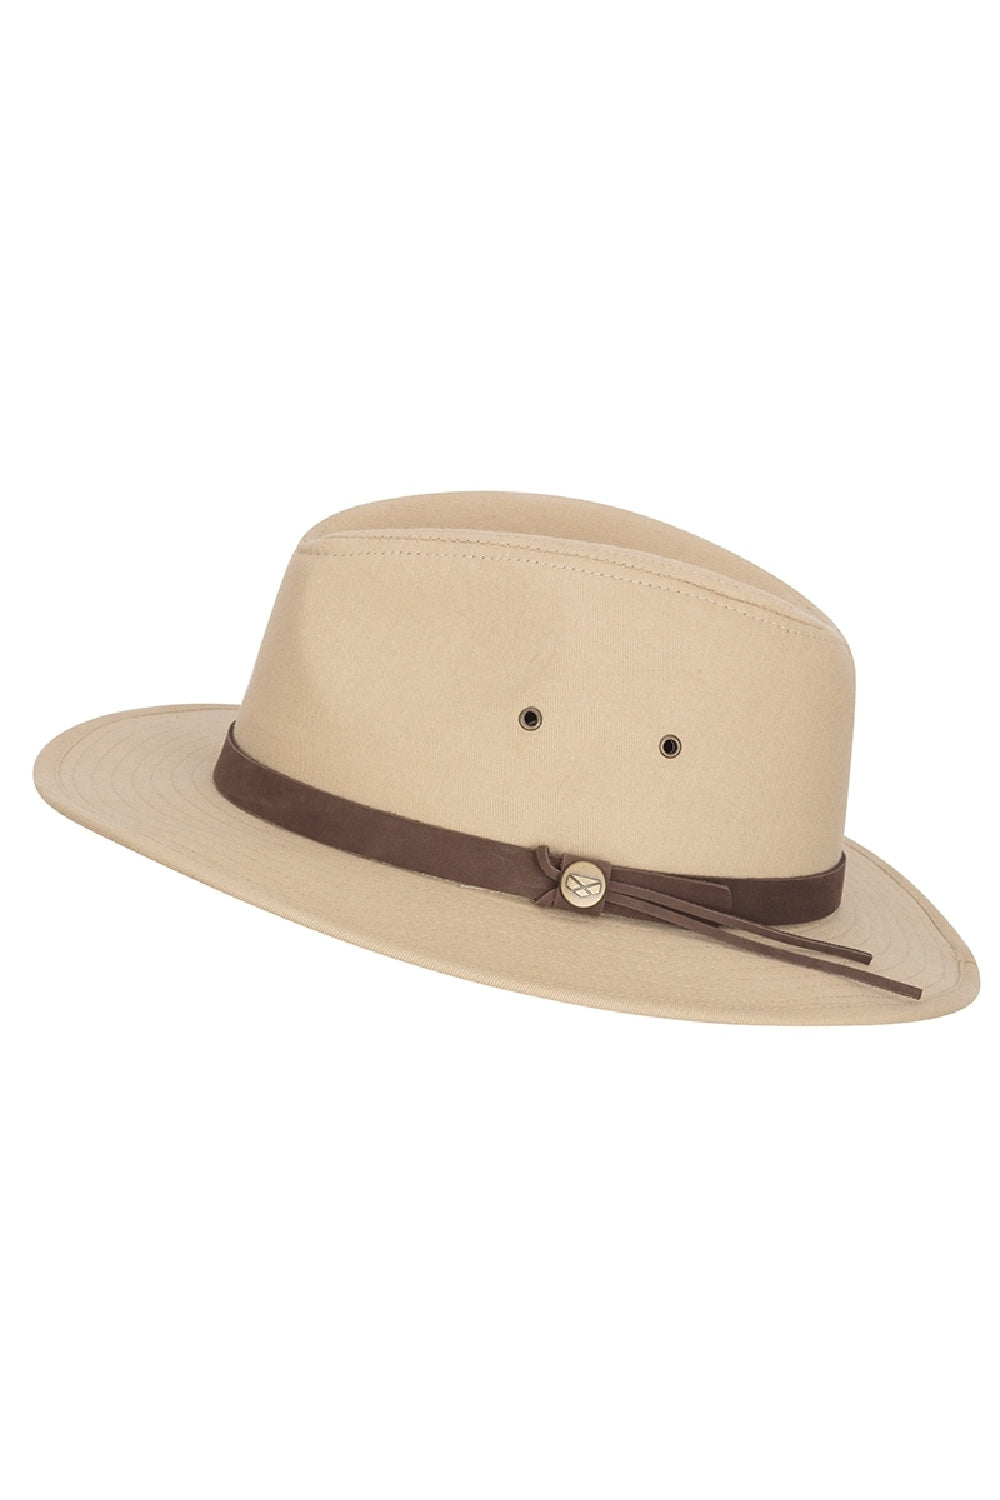 Hoggs Of Fife Panmure Canvas Foldable Hat in Desert Sand 